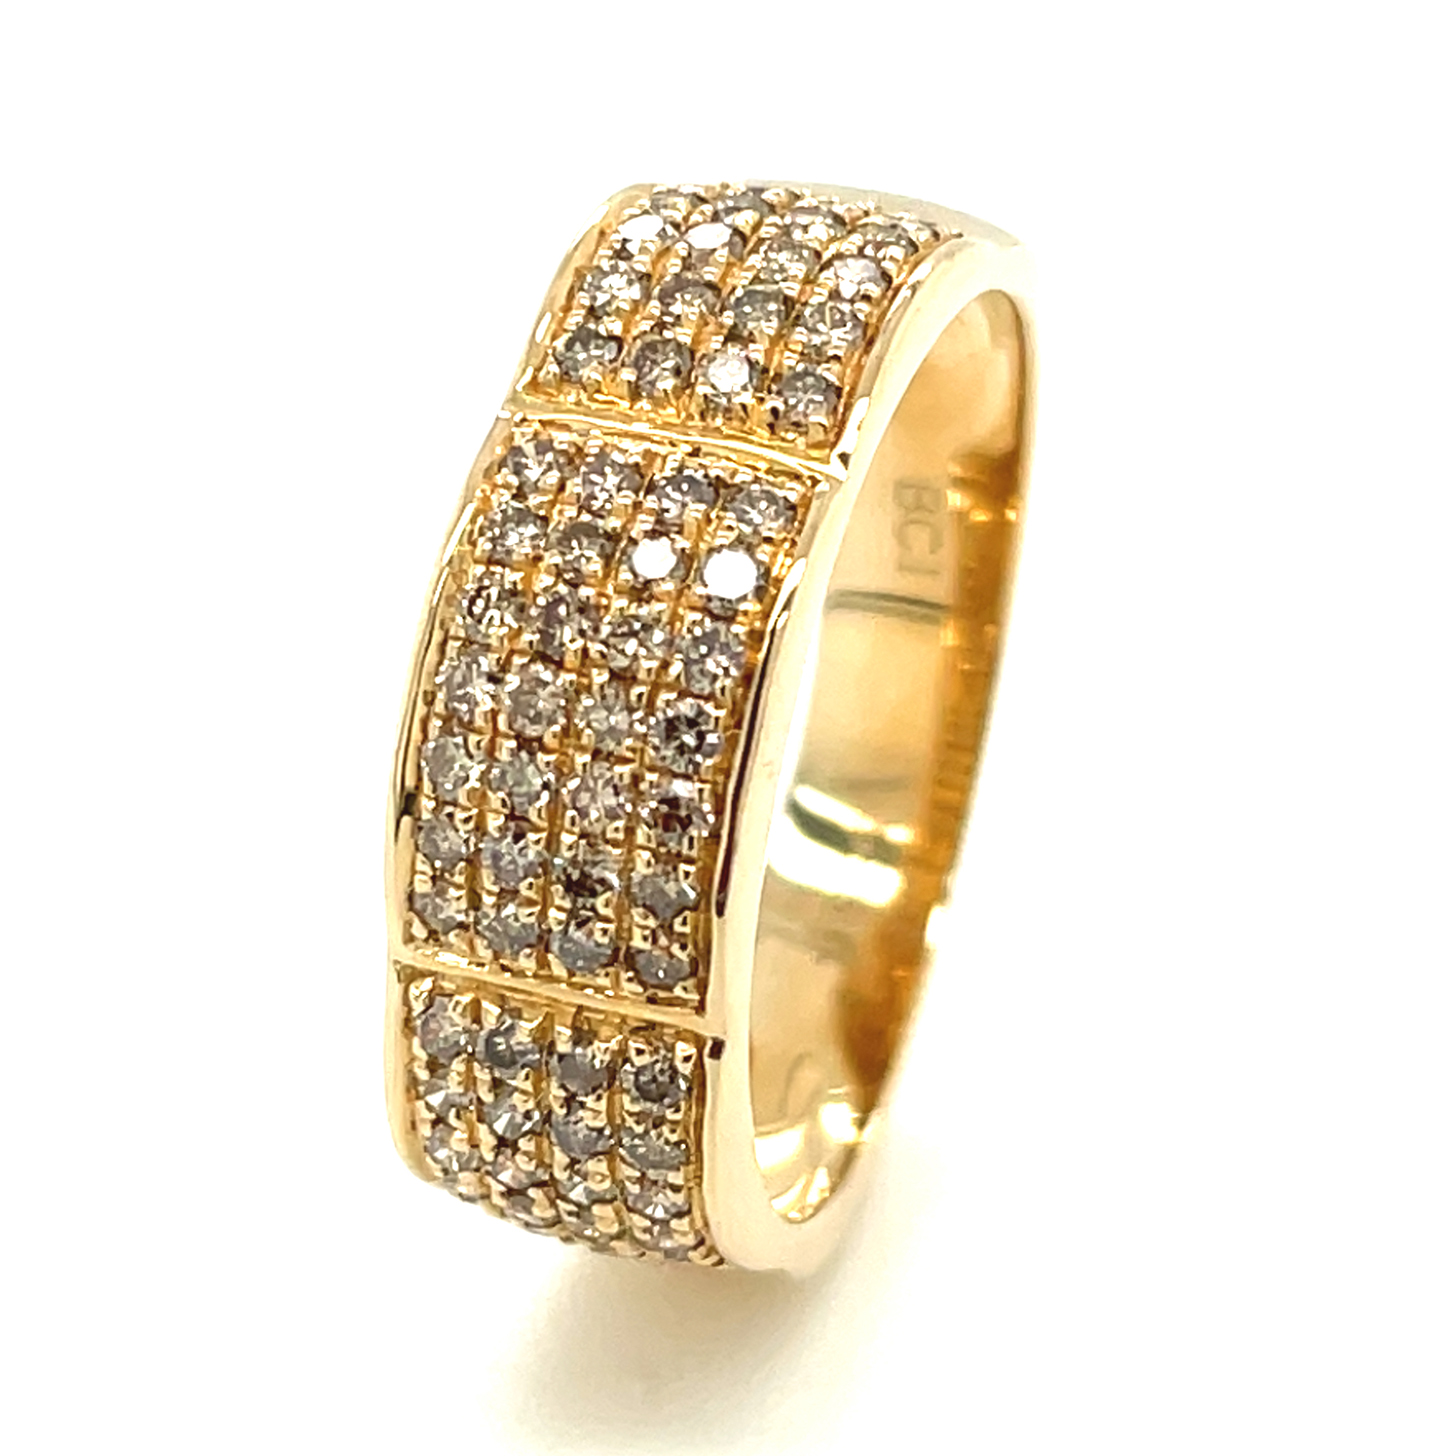 Brillant  champagner (TLB), ca. 0,532 ct. Edelstein, 585 Gelbgold Ring, Sogni d´oro Facettenreich